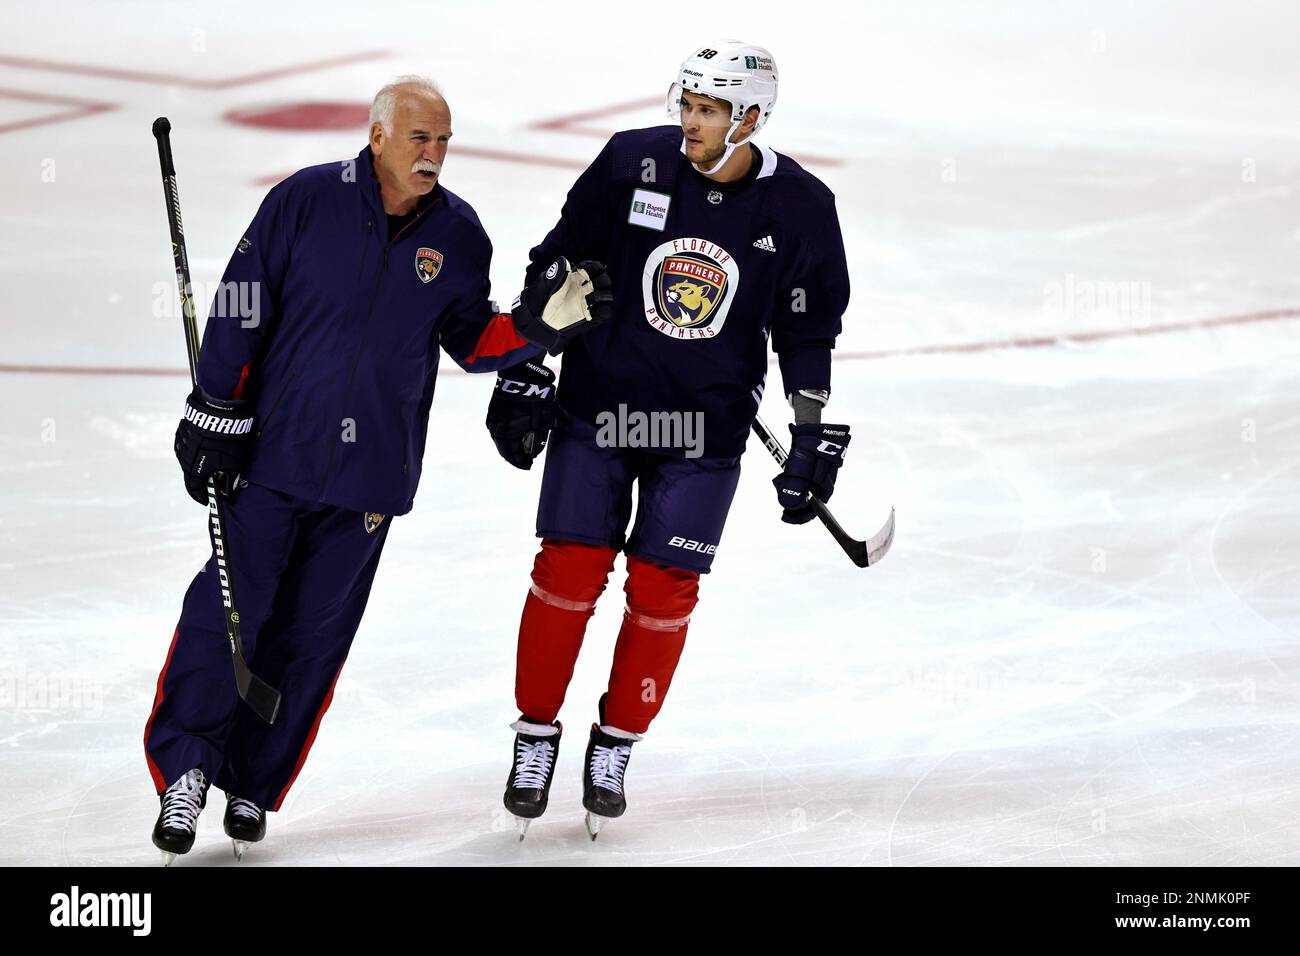 Florida Panthers head coach Joel Quenneville skates during the first  practice of training camp in preparation for the 2020-21 NHL season at the  BB&T Center on Monday, Jan. 4, 2021 in Sunrise. (